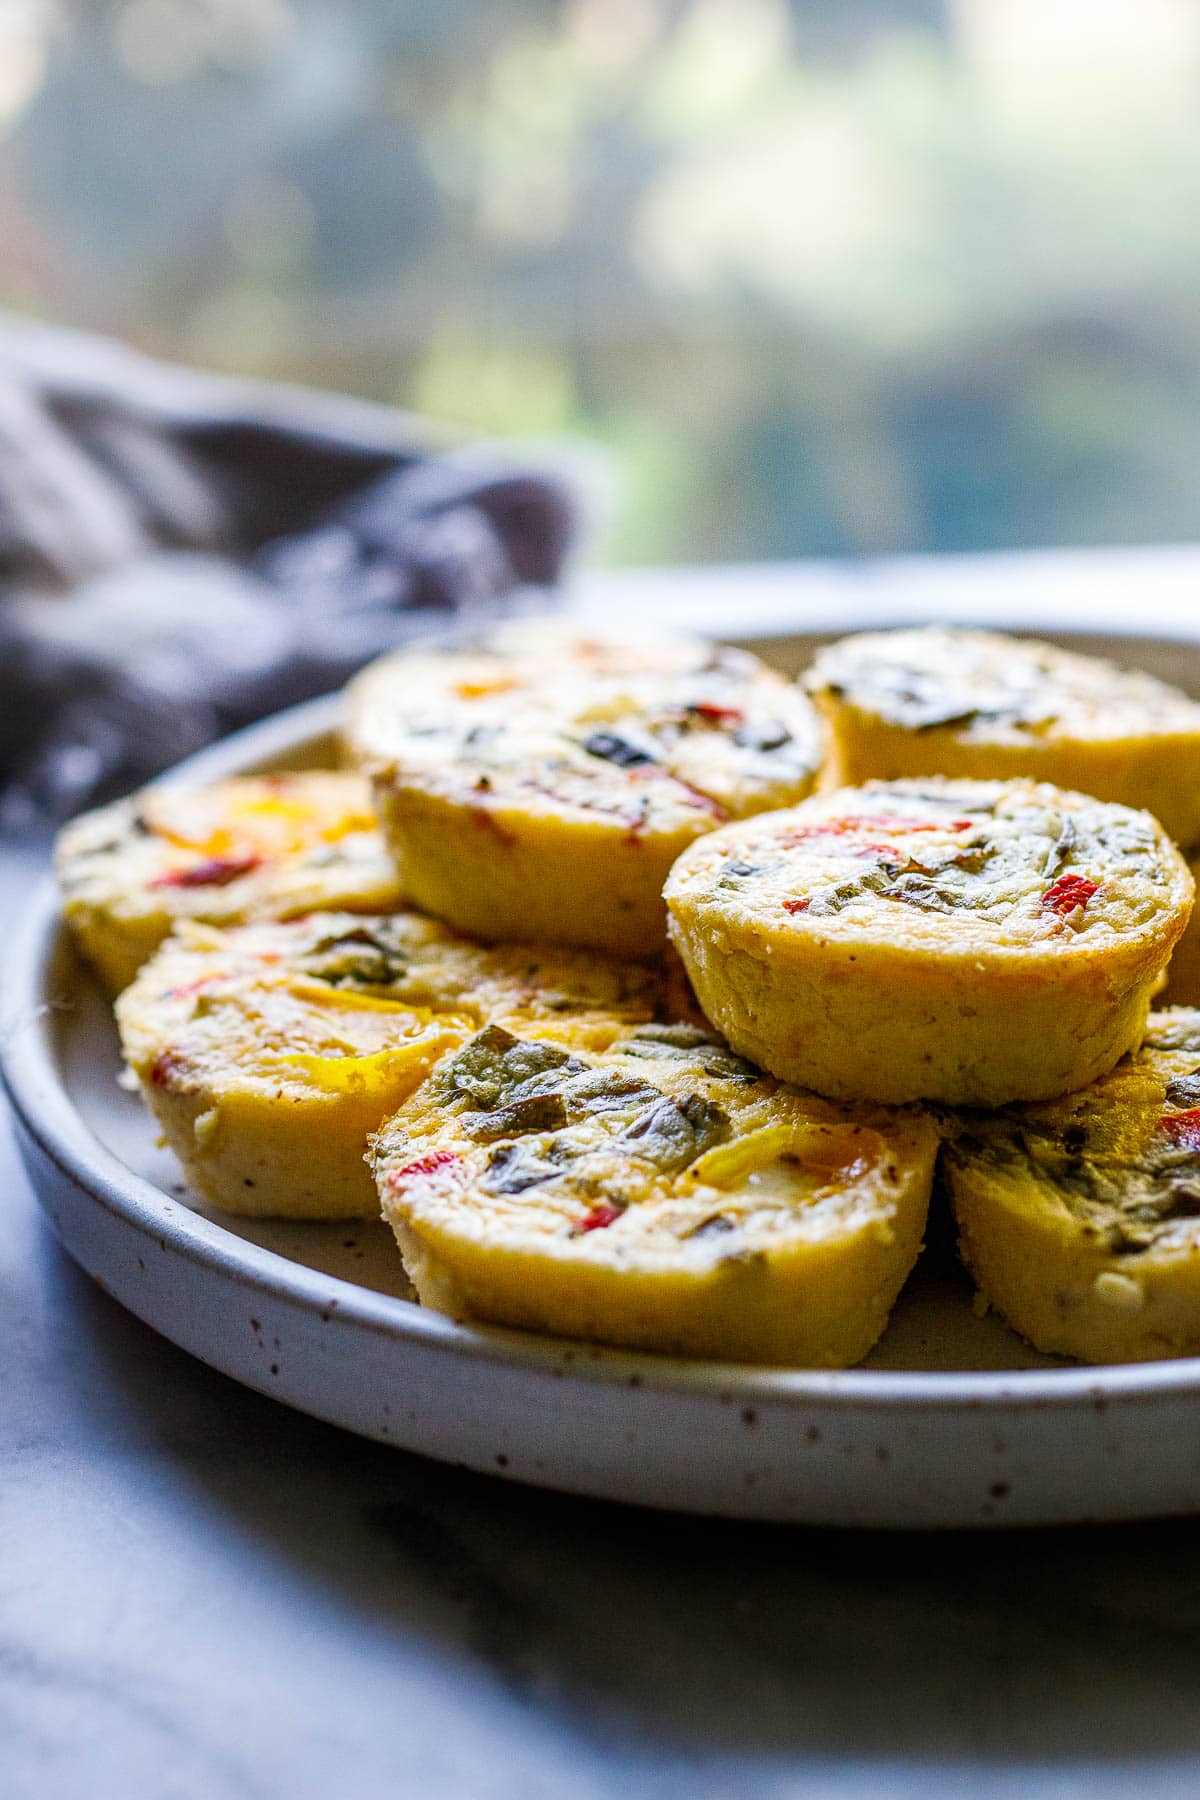 These quick and easy egg bites are the perfect make-ahead breakfast. Make them in 35 minutes, and store them in the fridge for the busy work week, or freeze and reheat. Keto and Vegetarian.